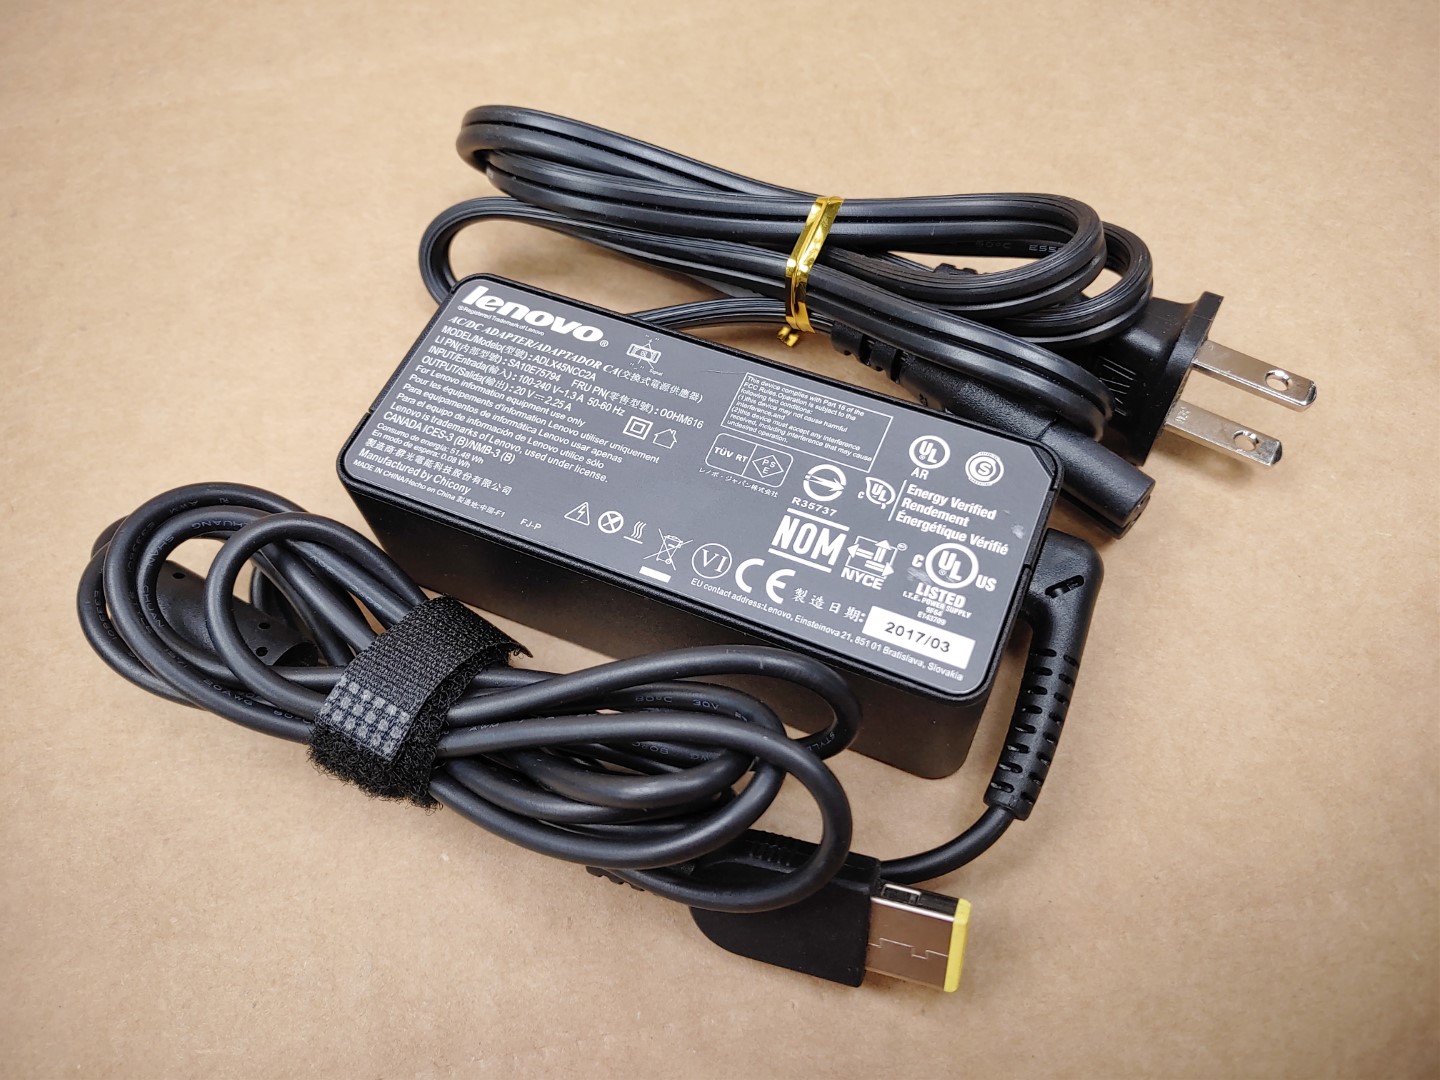 Great Condition! Tested and pulled from a working environment! **OEM POWER ADAPTER INCLUDED**Item Specifics: MPN : DK1523UPC : N/ACompatible Brand : For LenovoCompatible Product Line : For Lenovo ThinkPadCompatible Model : For LenovoPorts/Interfaces : USB 3.0Brand : LenovoModel : ThinkPad USB 3.0 Ultra DockType : Docking Station - 2